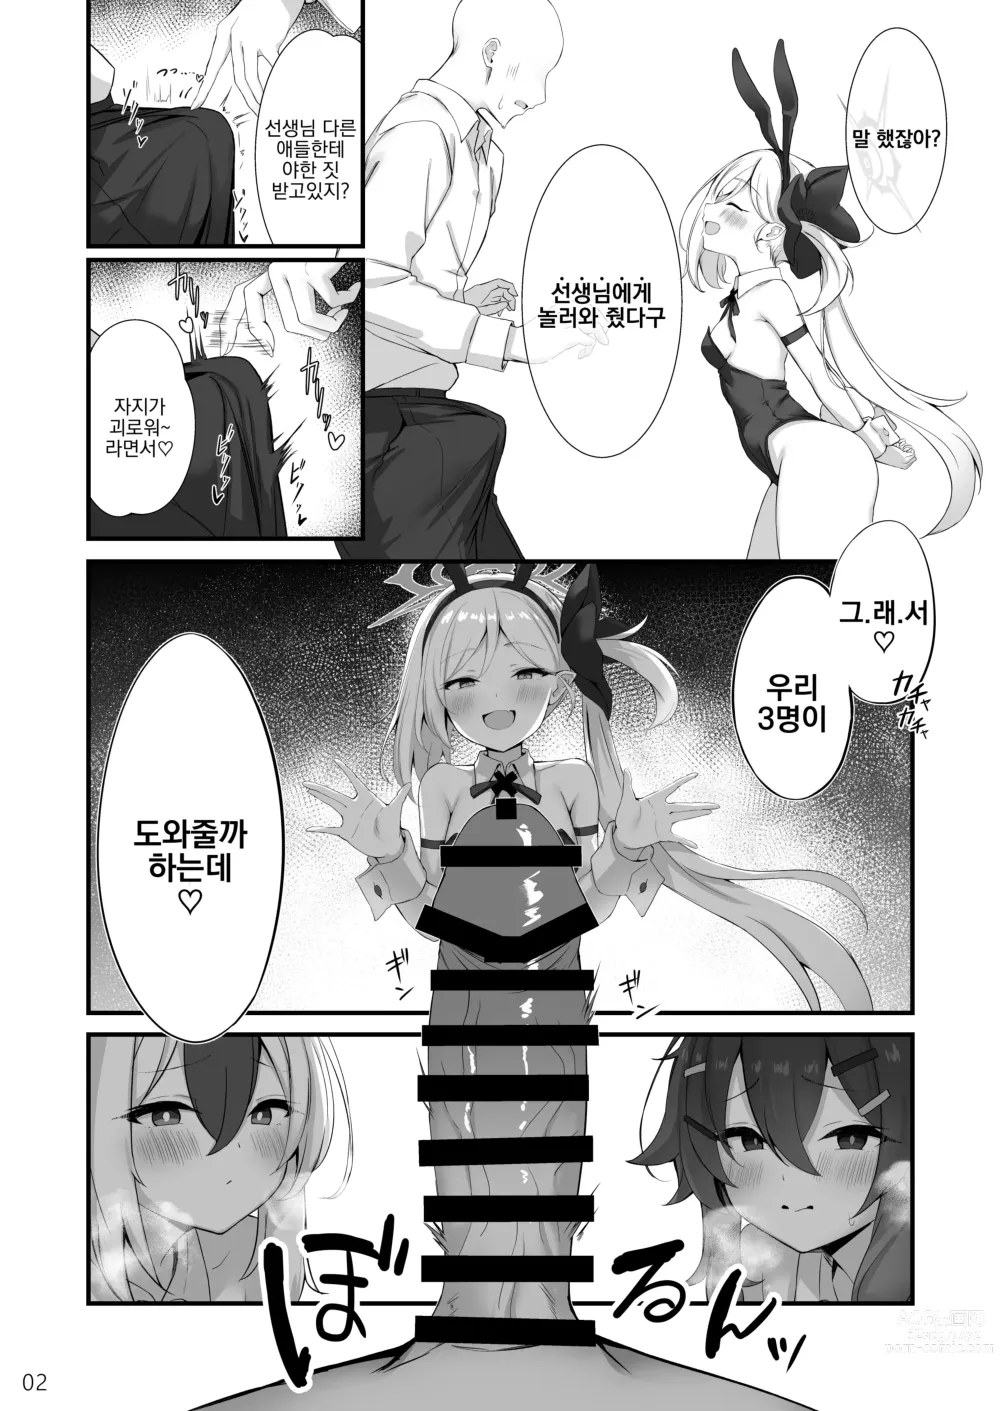 Page 3 of doujinshi 뷰르릇 아카이브 #3